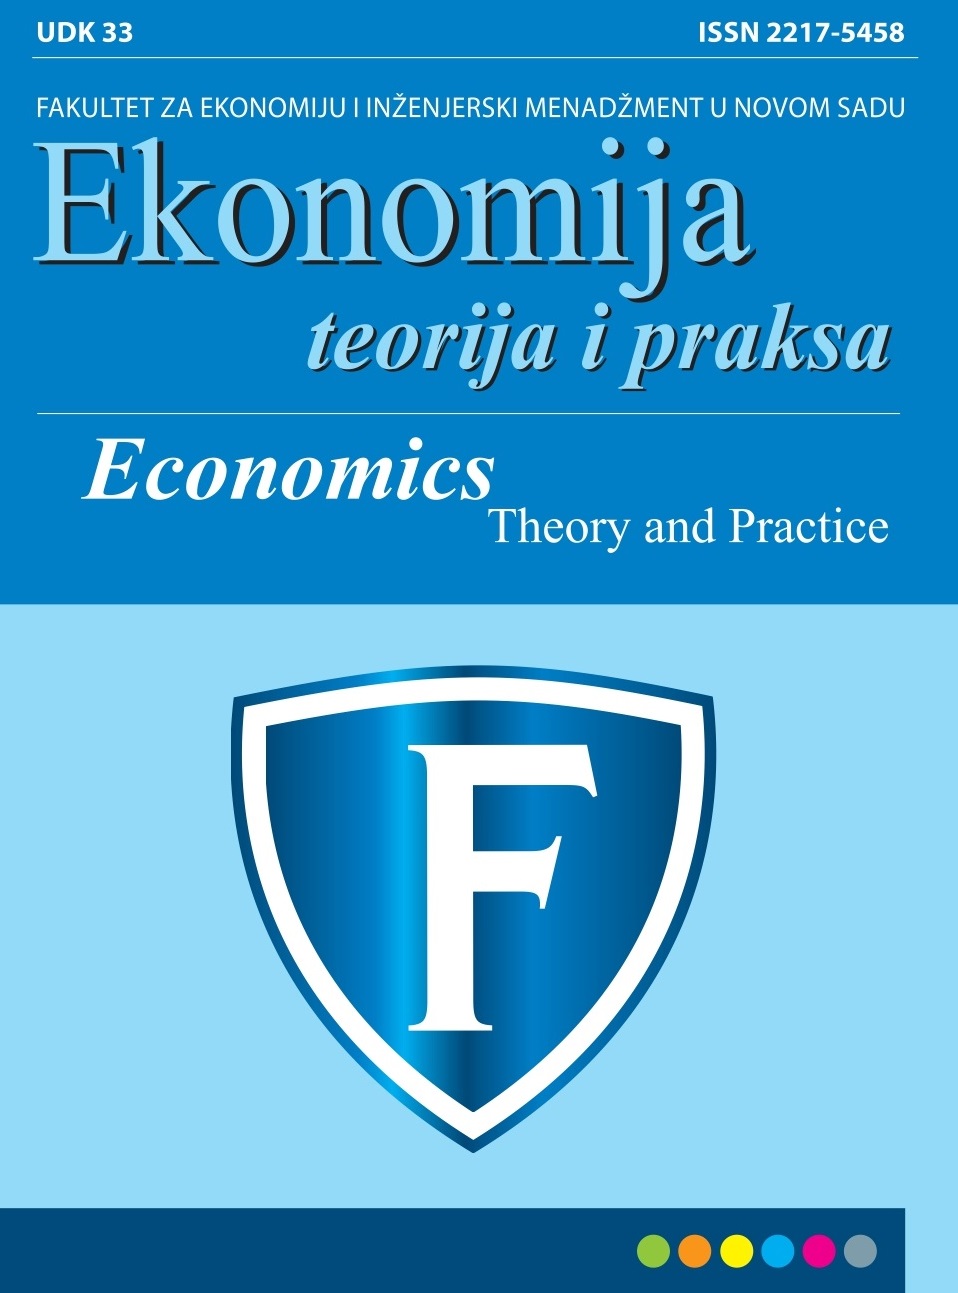 					View Vol. 14 No. 2 (2021): Economics - Theory and Practice
				